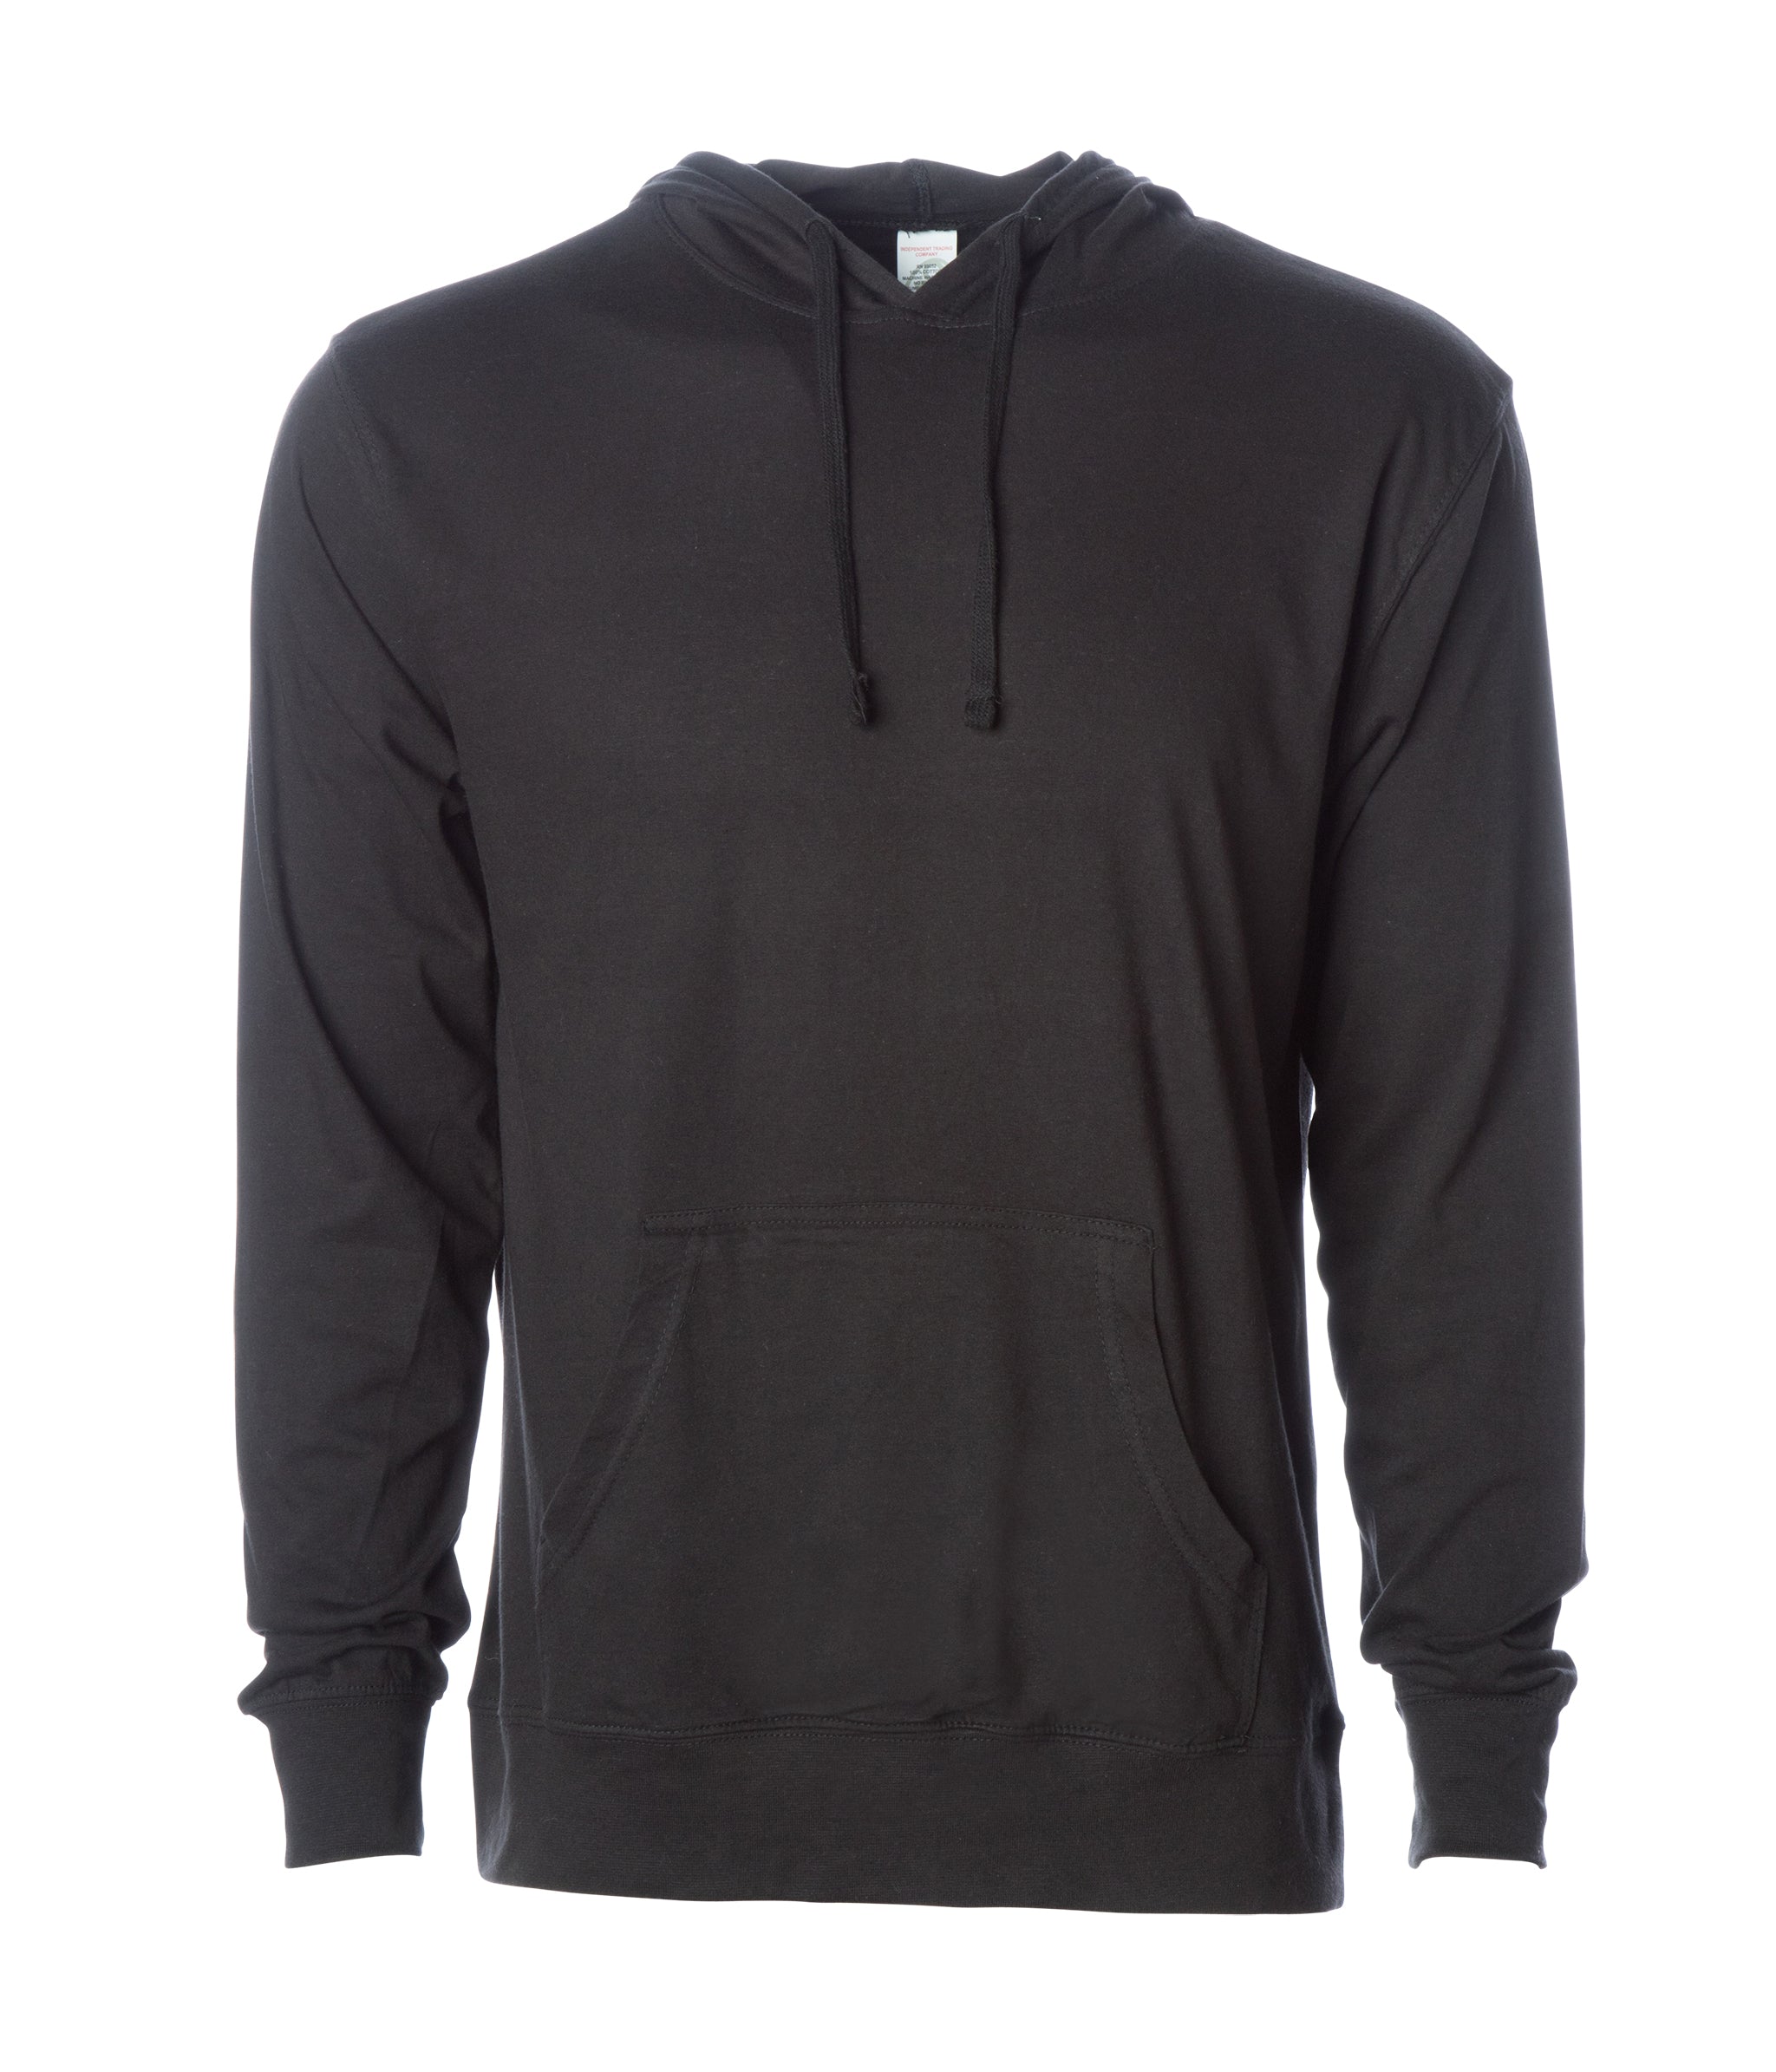 Independent Trading Co. SS150J Lightweight Hooded Pullover T-Shirt - Black - M